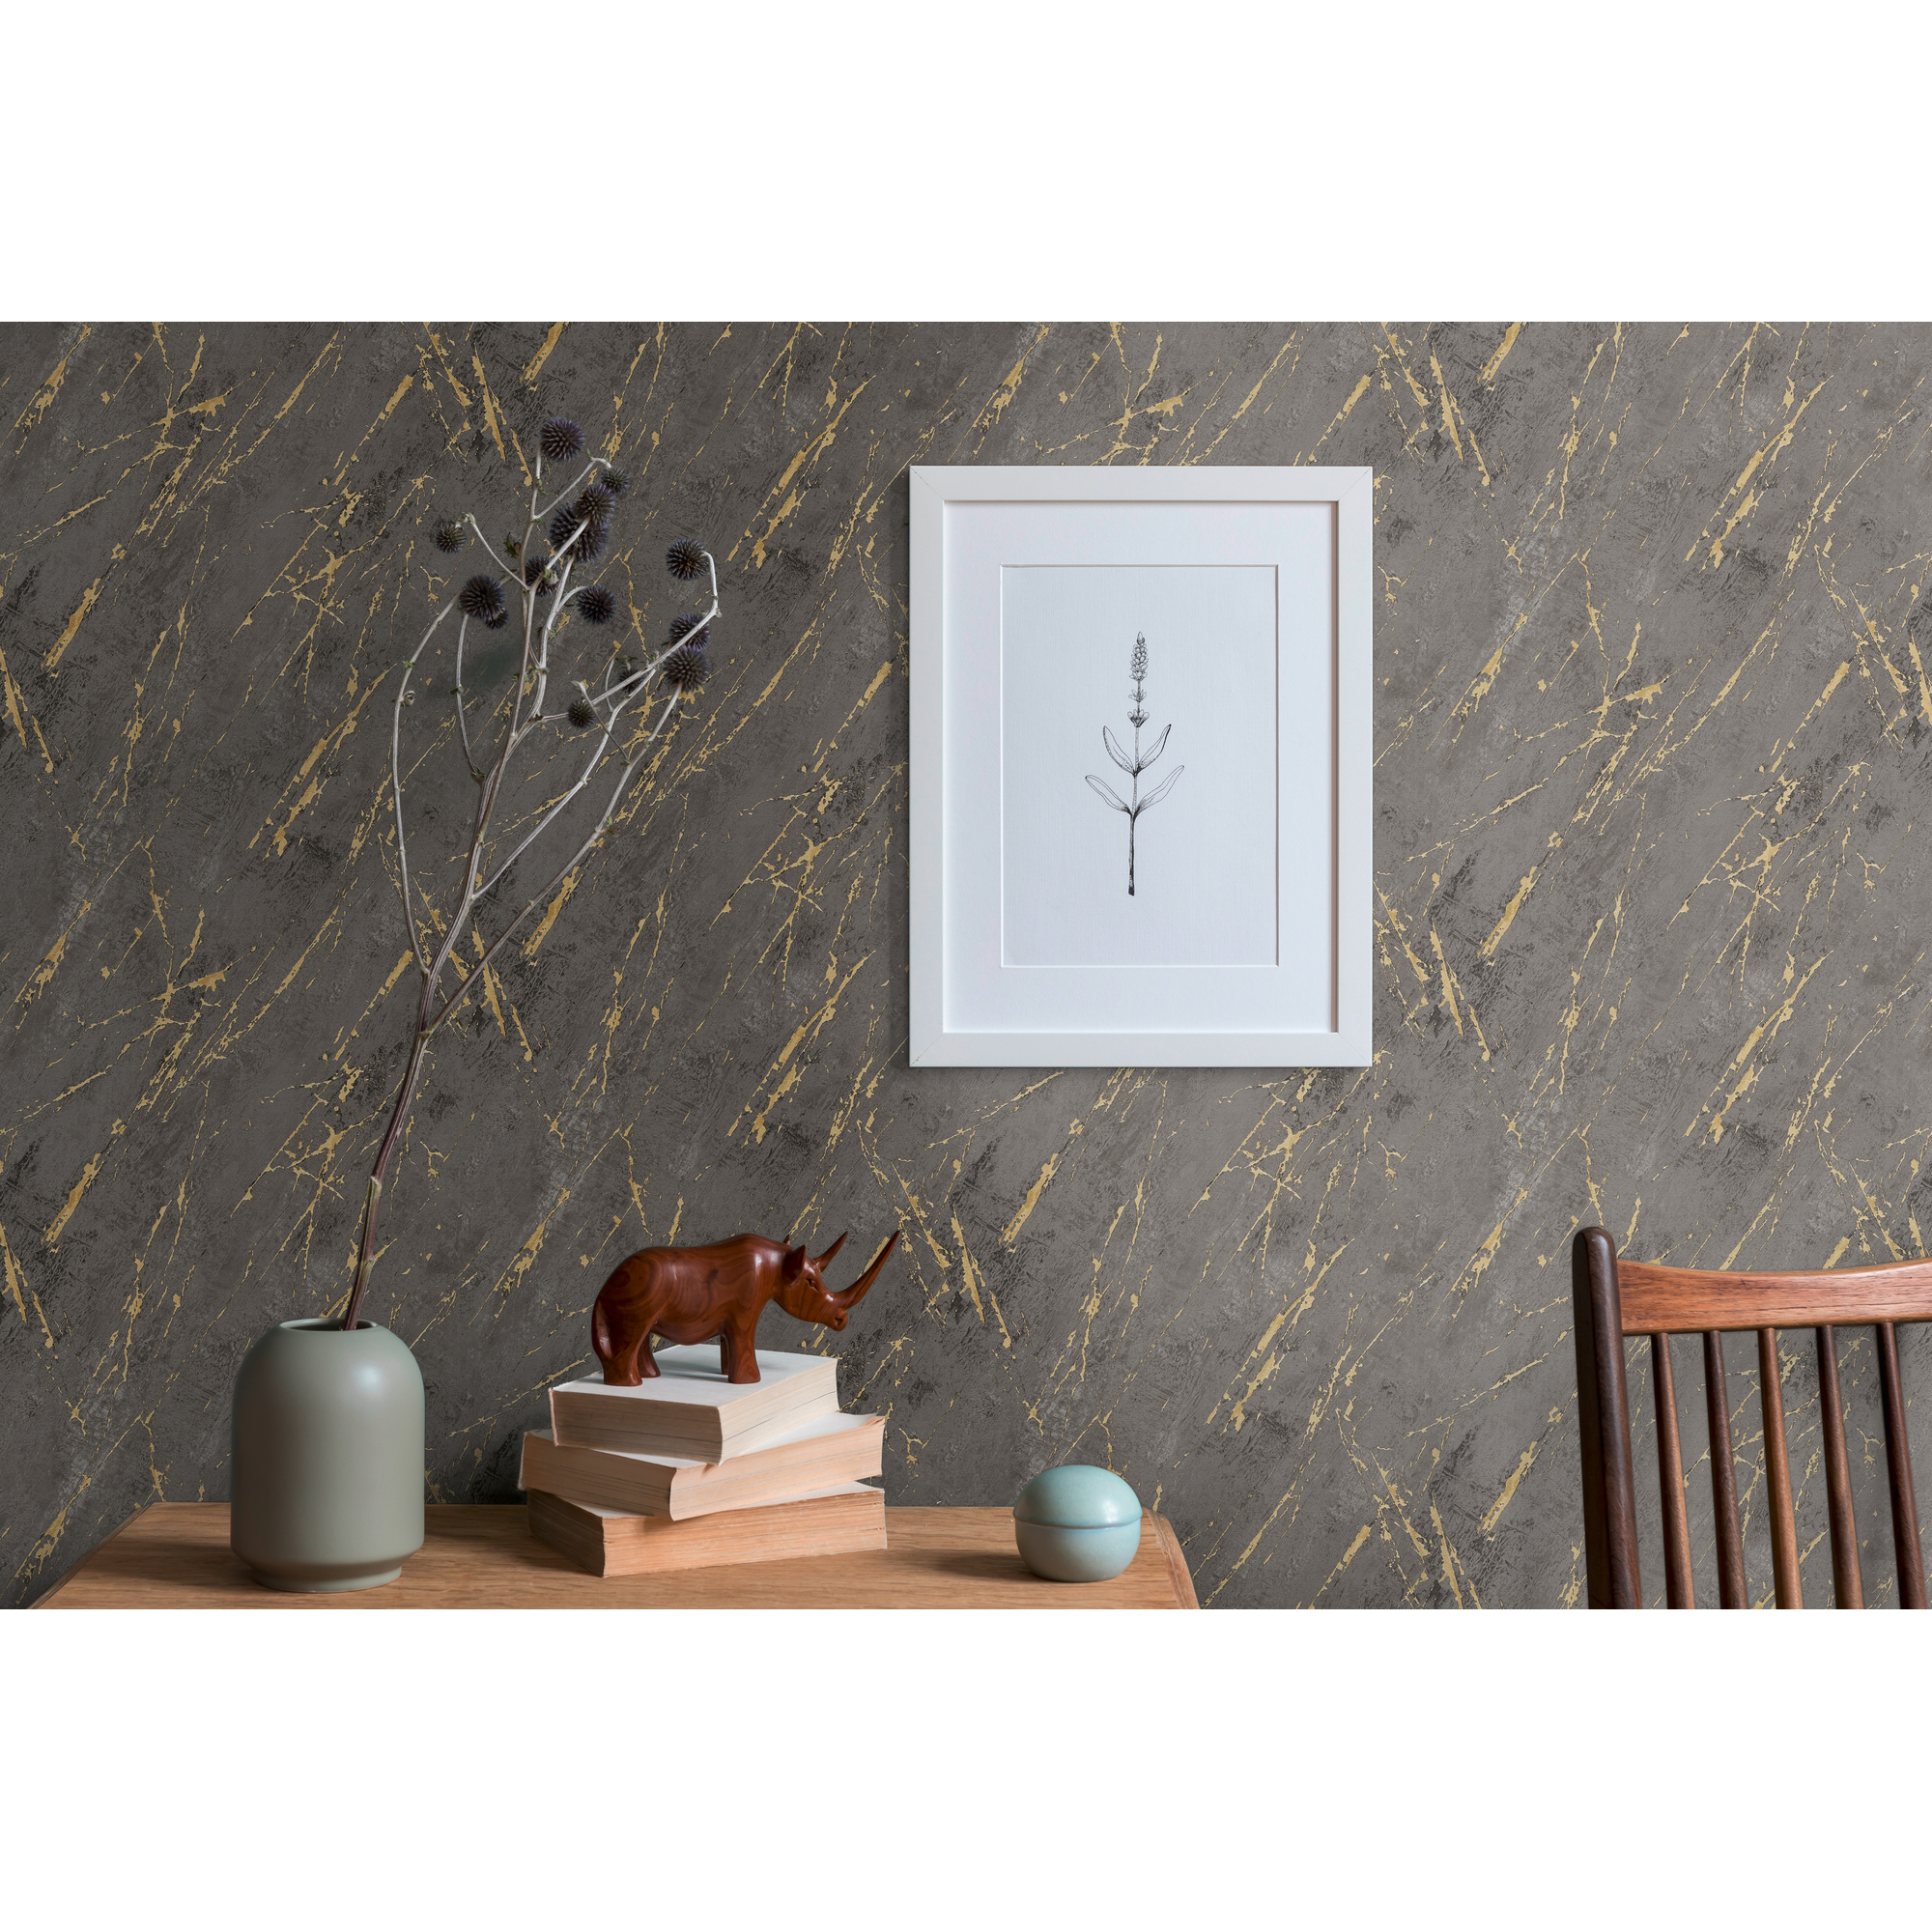 Vliestapete 'The BoS' Marmor anthrazit/gold 10,05 x 0,53 m + product picture